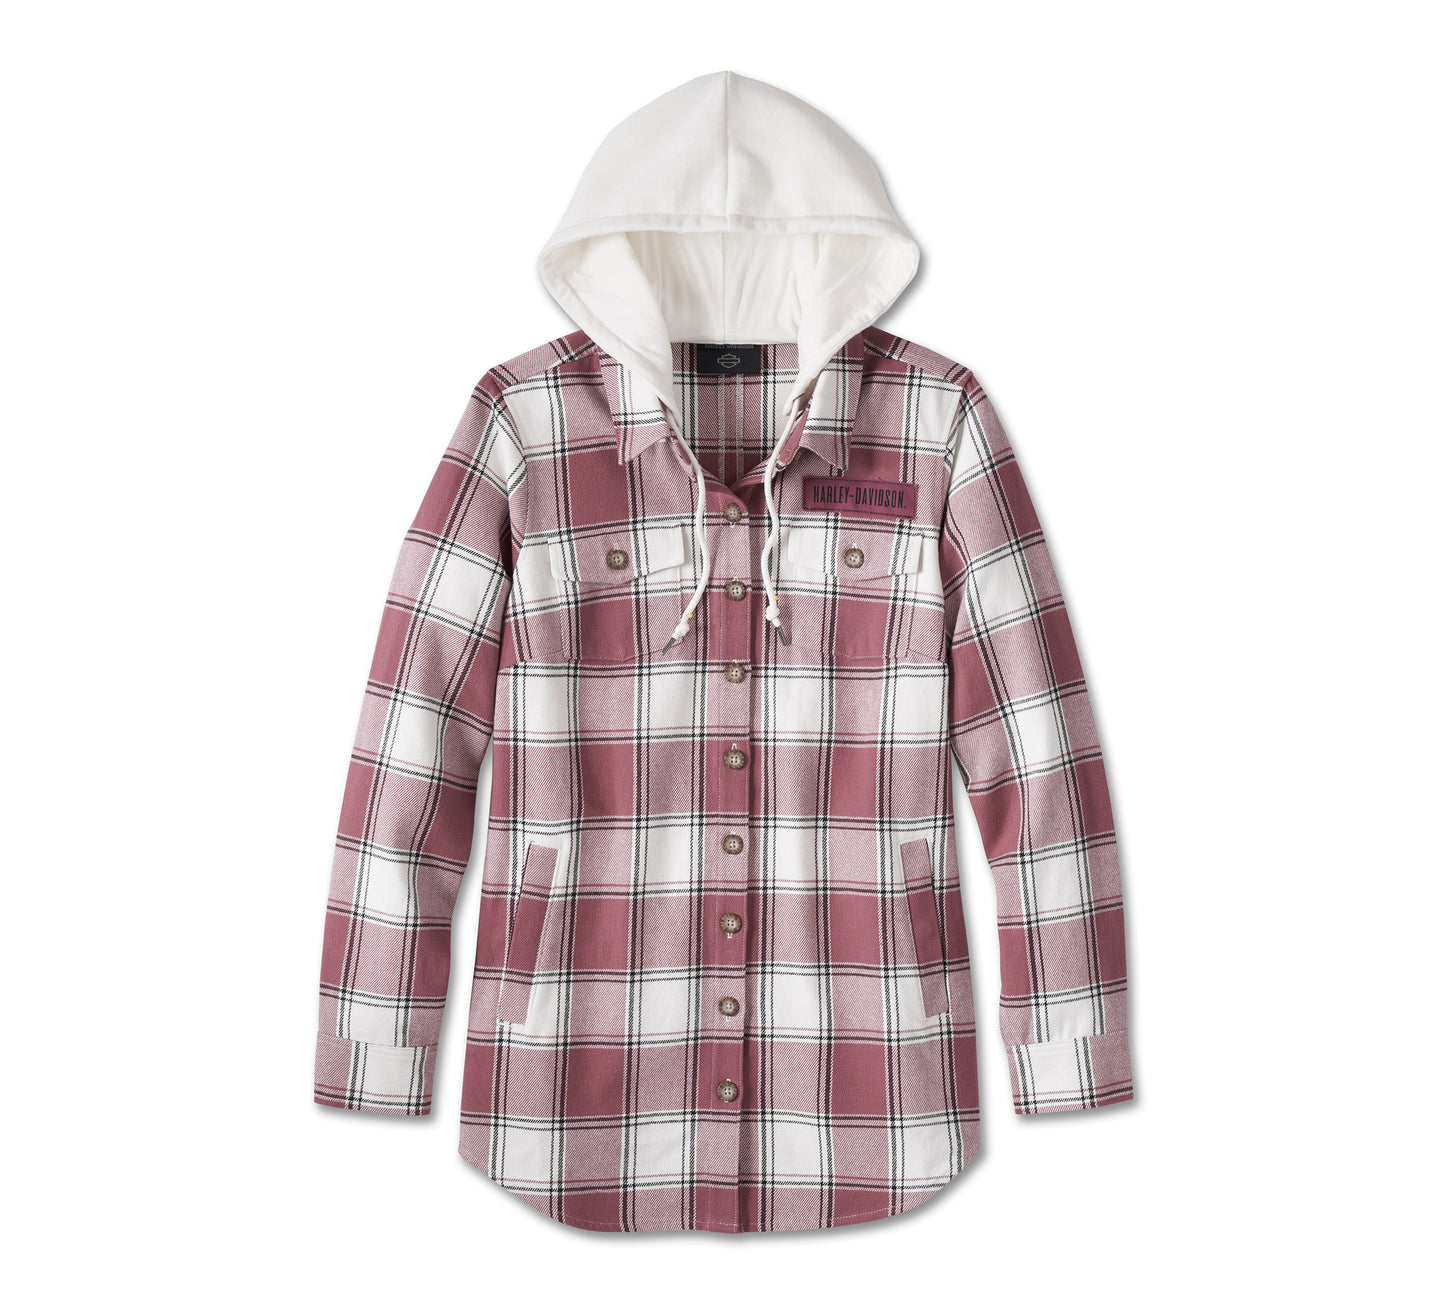 Harley-Davidson® Women's Thrill Seeker Tunic with Removable Hood - YD Plaid - Crushed Berry